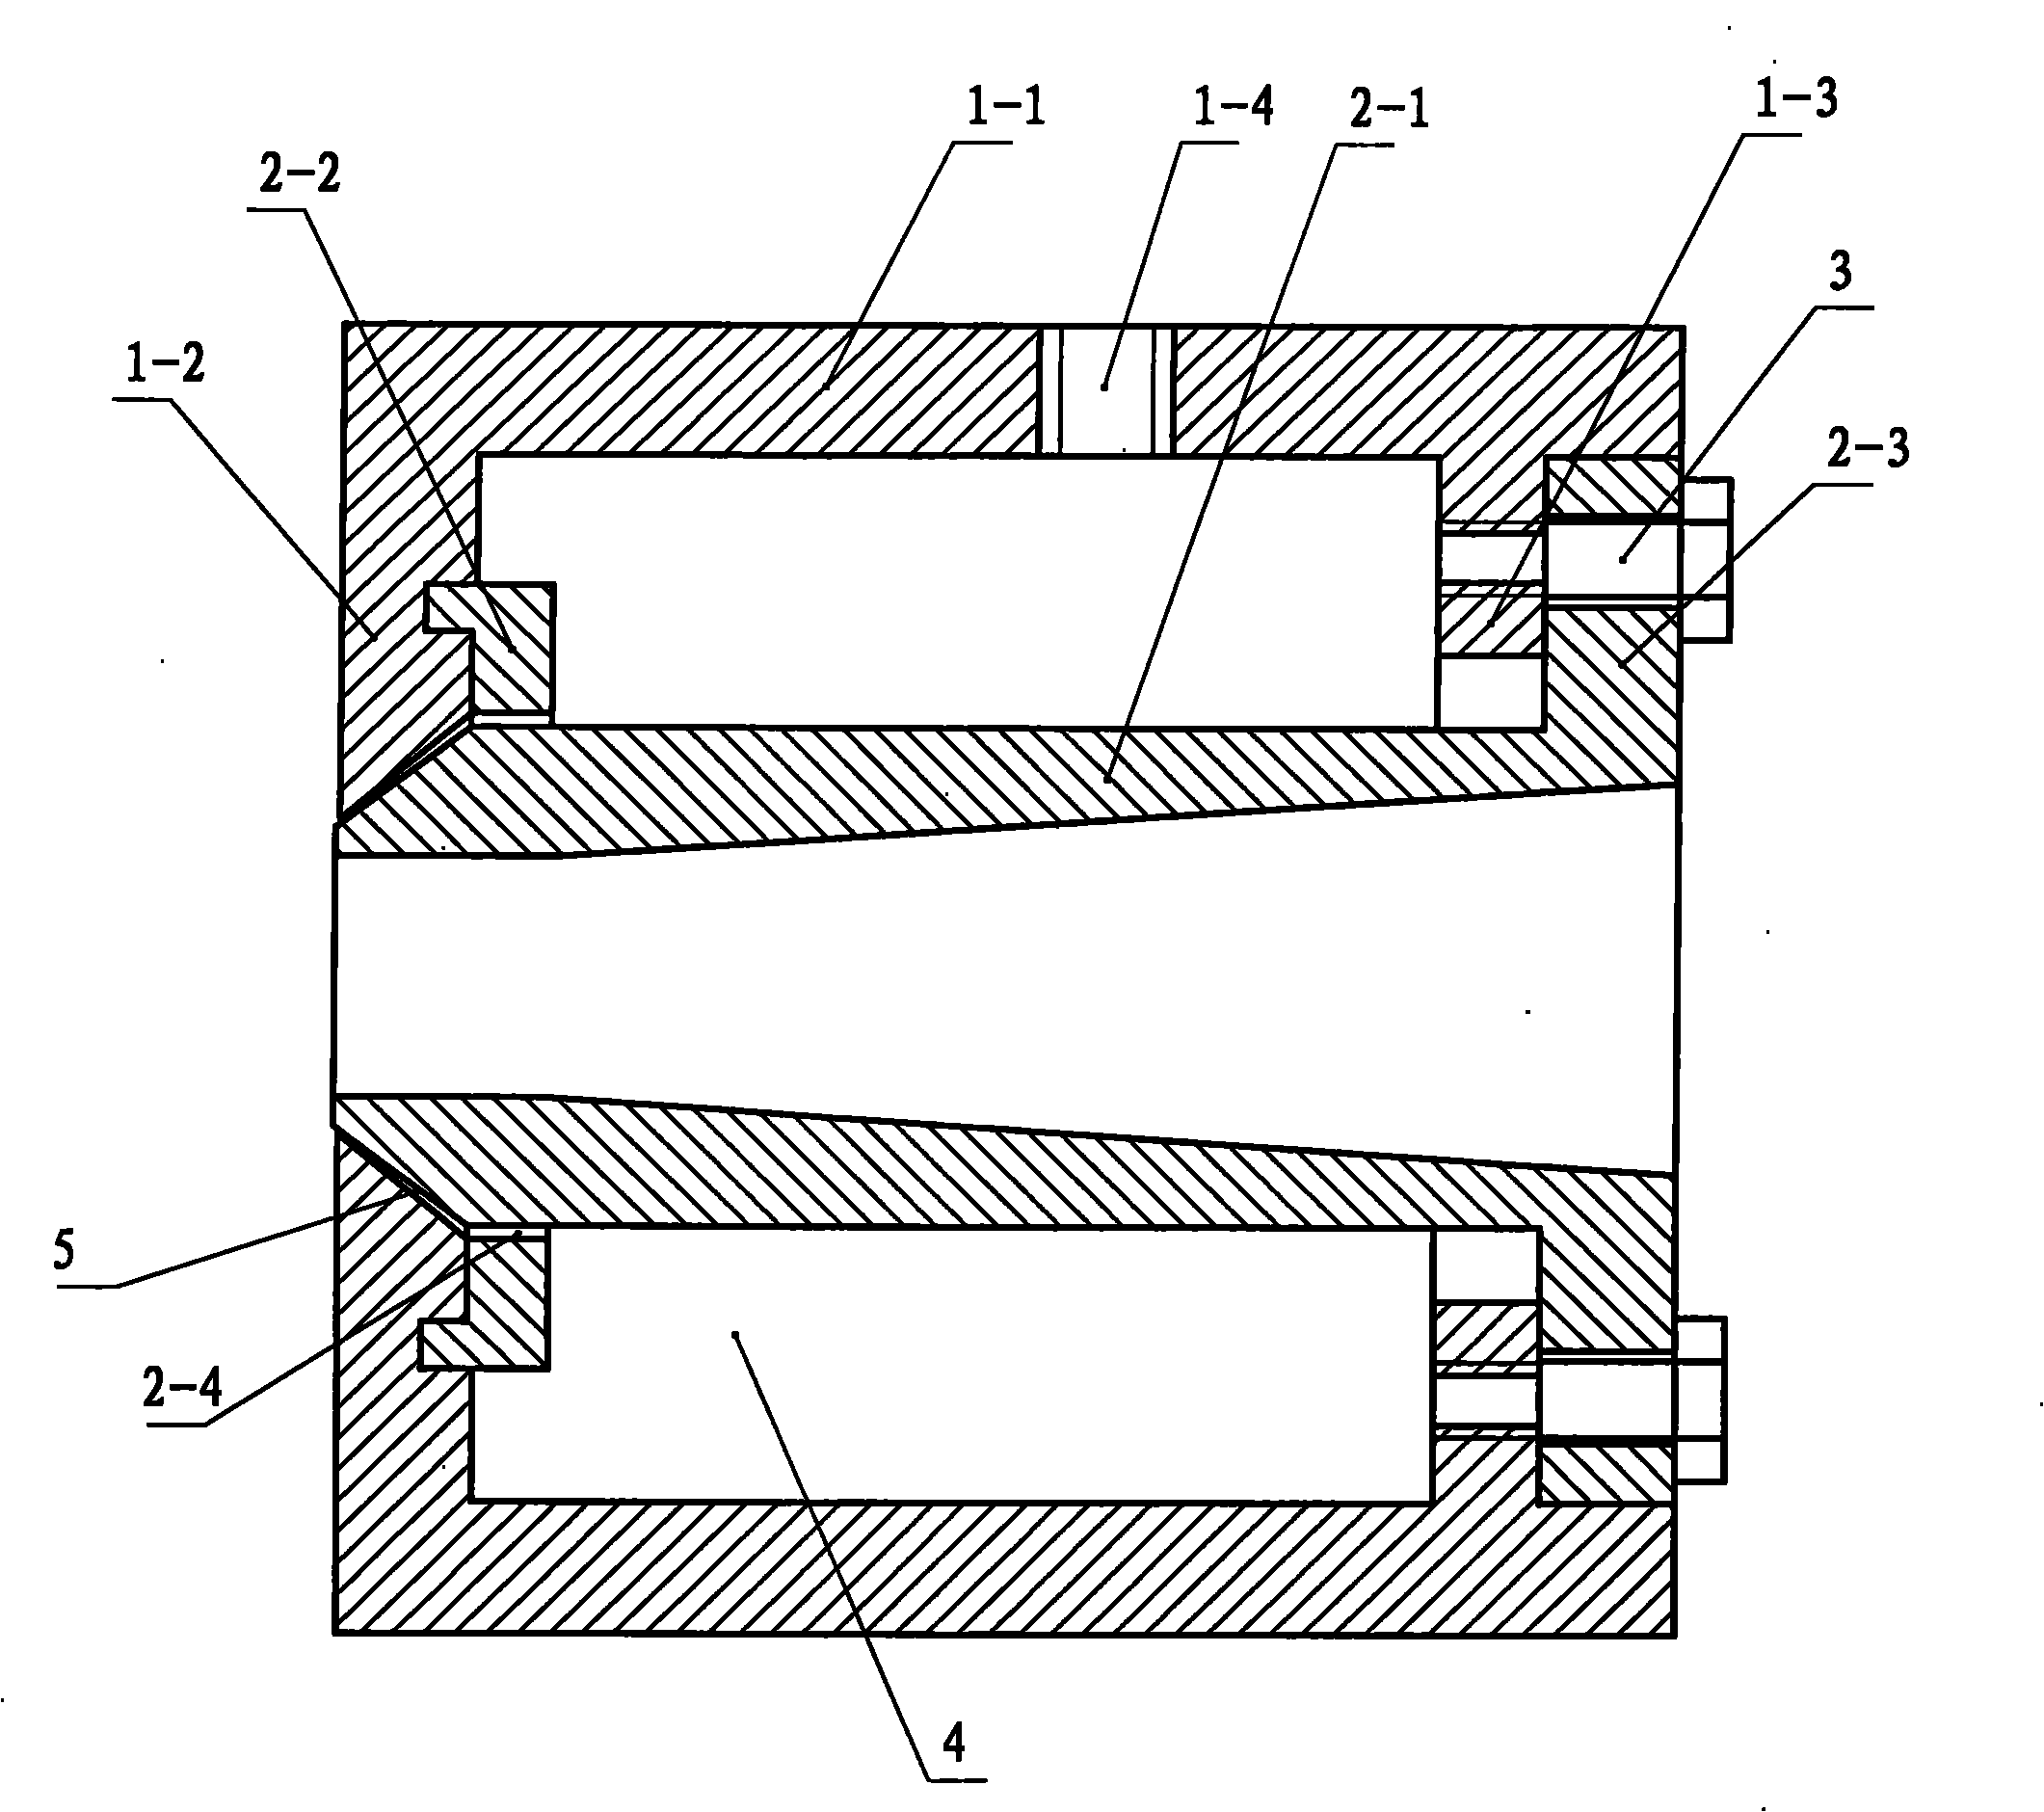 Annular water-blowing device